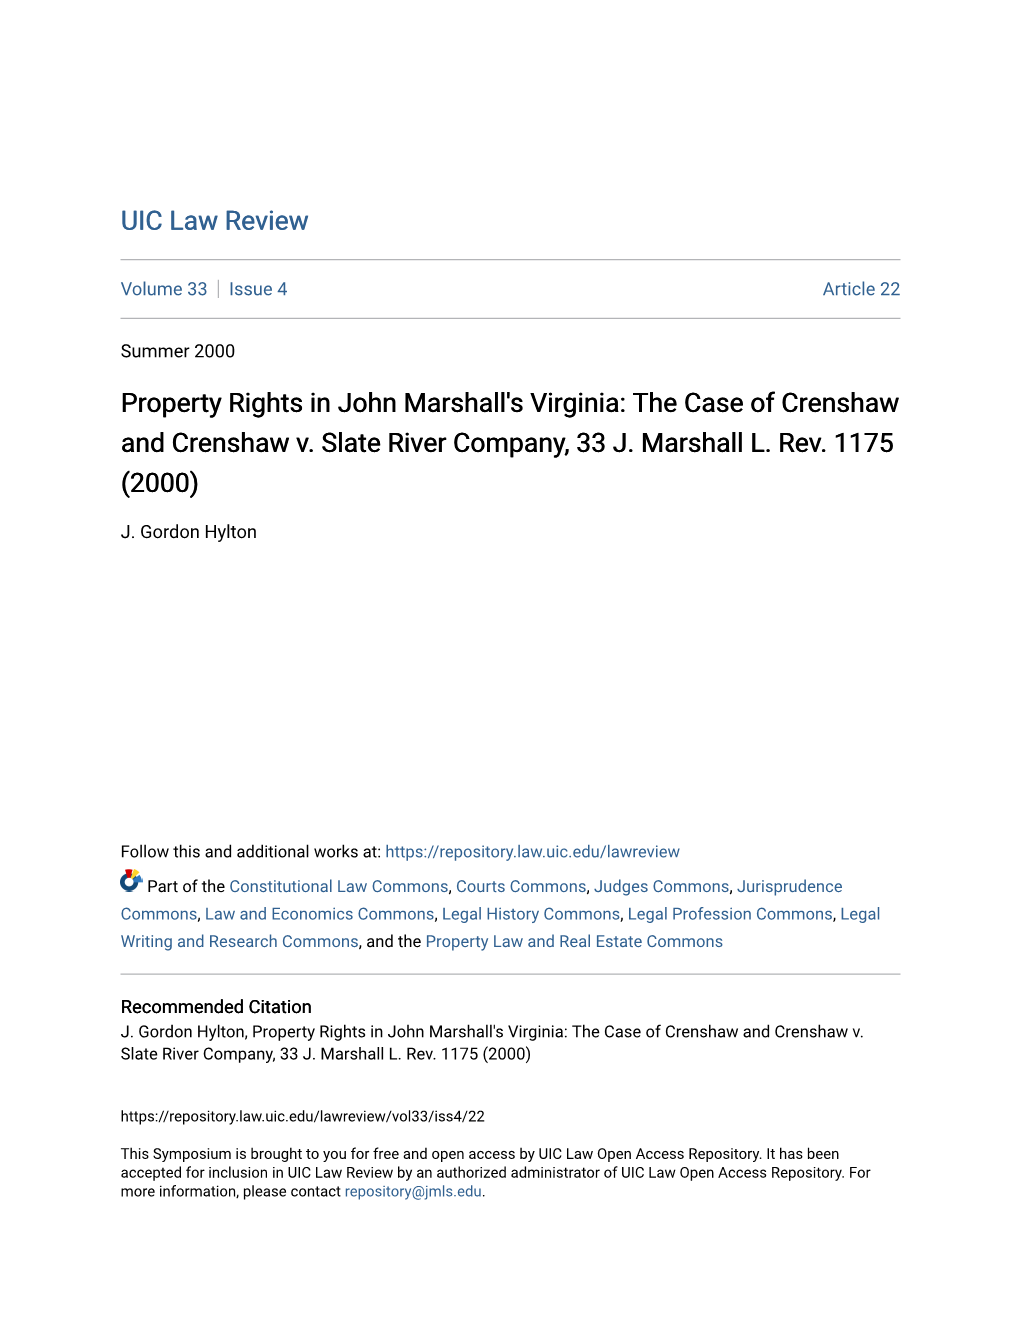 Property Rights in John Marshall's Virginia: the Case of Crenshaw and Crenshaw V